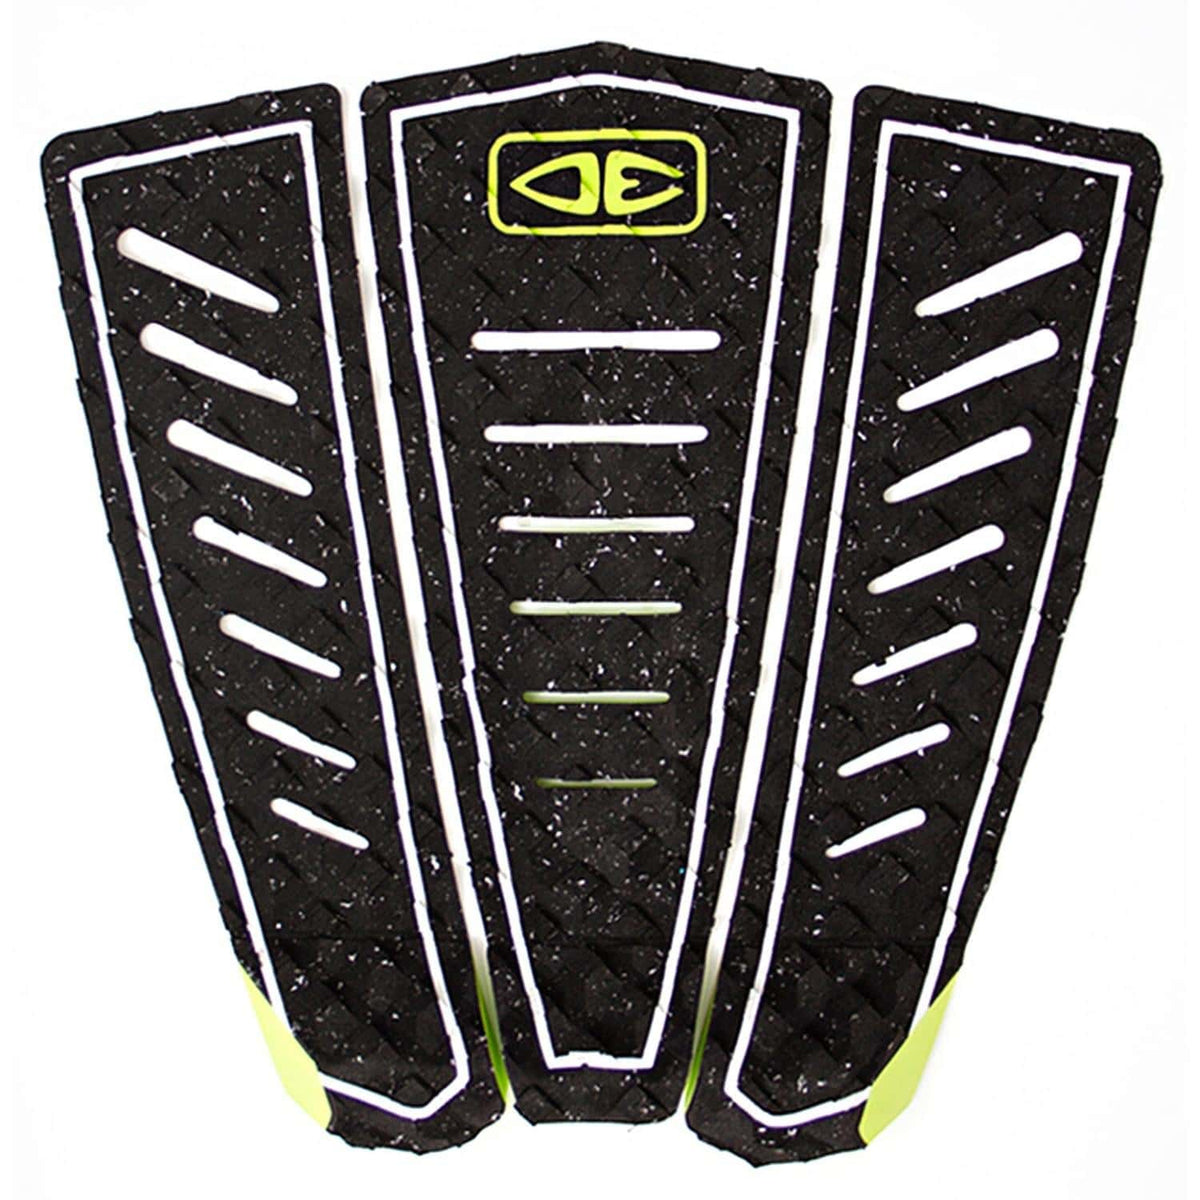 Ocean And Earth Kanoa Igarashi Pro Surfboard Tail Pad - Black/Lime - 3 Piece Tail Pad by Ocean and Earth